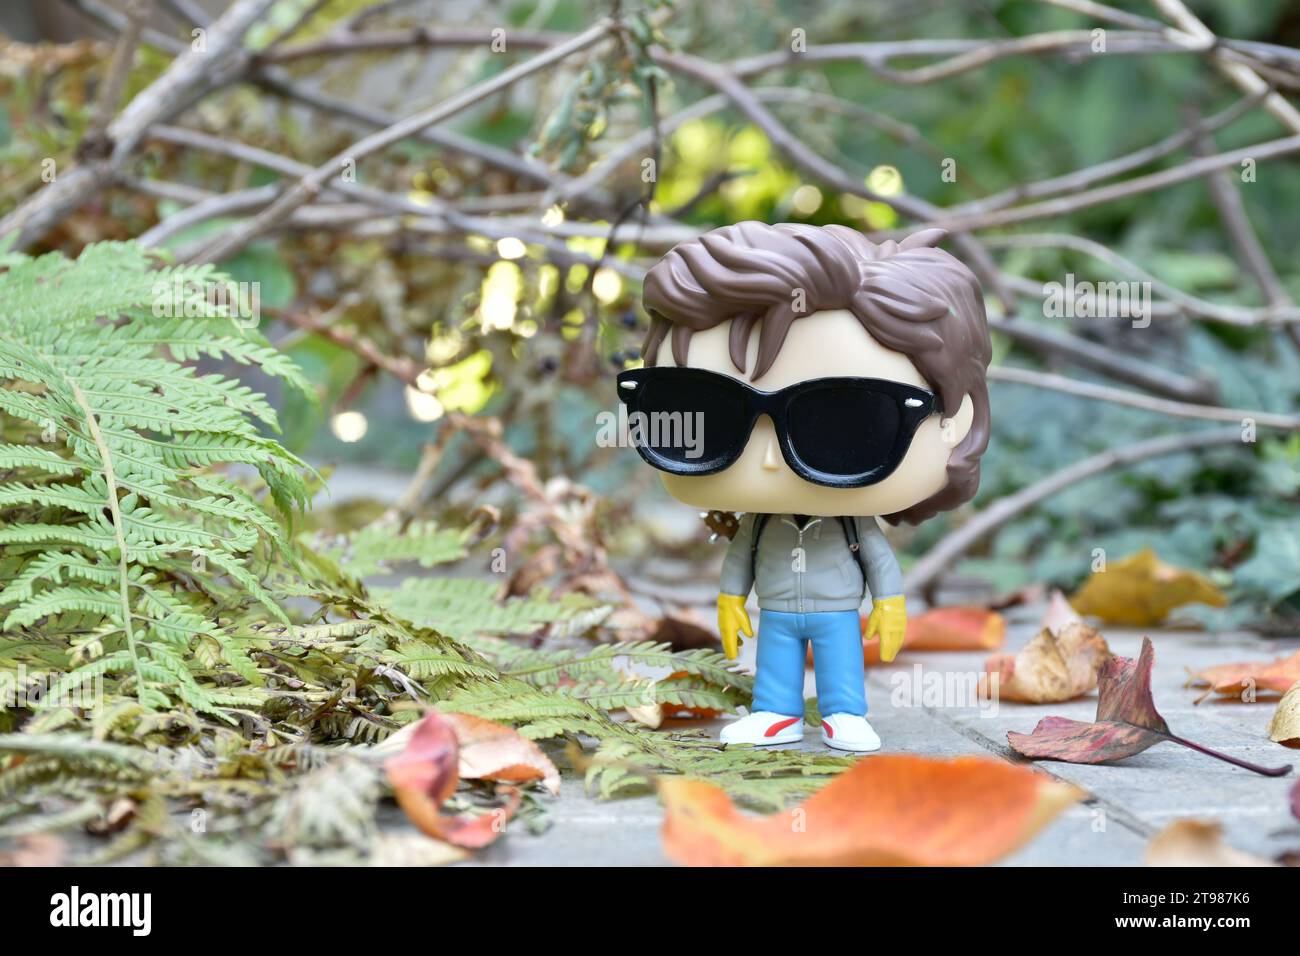 Funko Pop action figure of Steve with sunglasses from popular Netflix TV series Stranger Things. Abandoned road, autumn forest, leaves, tree branches. Stock Photo